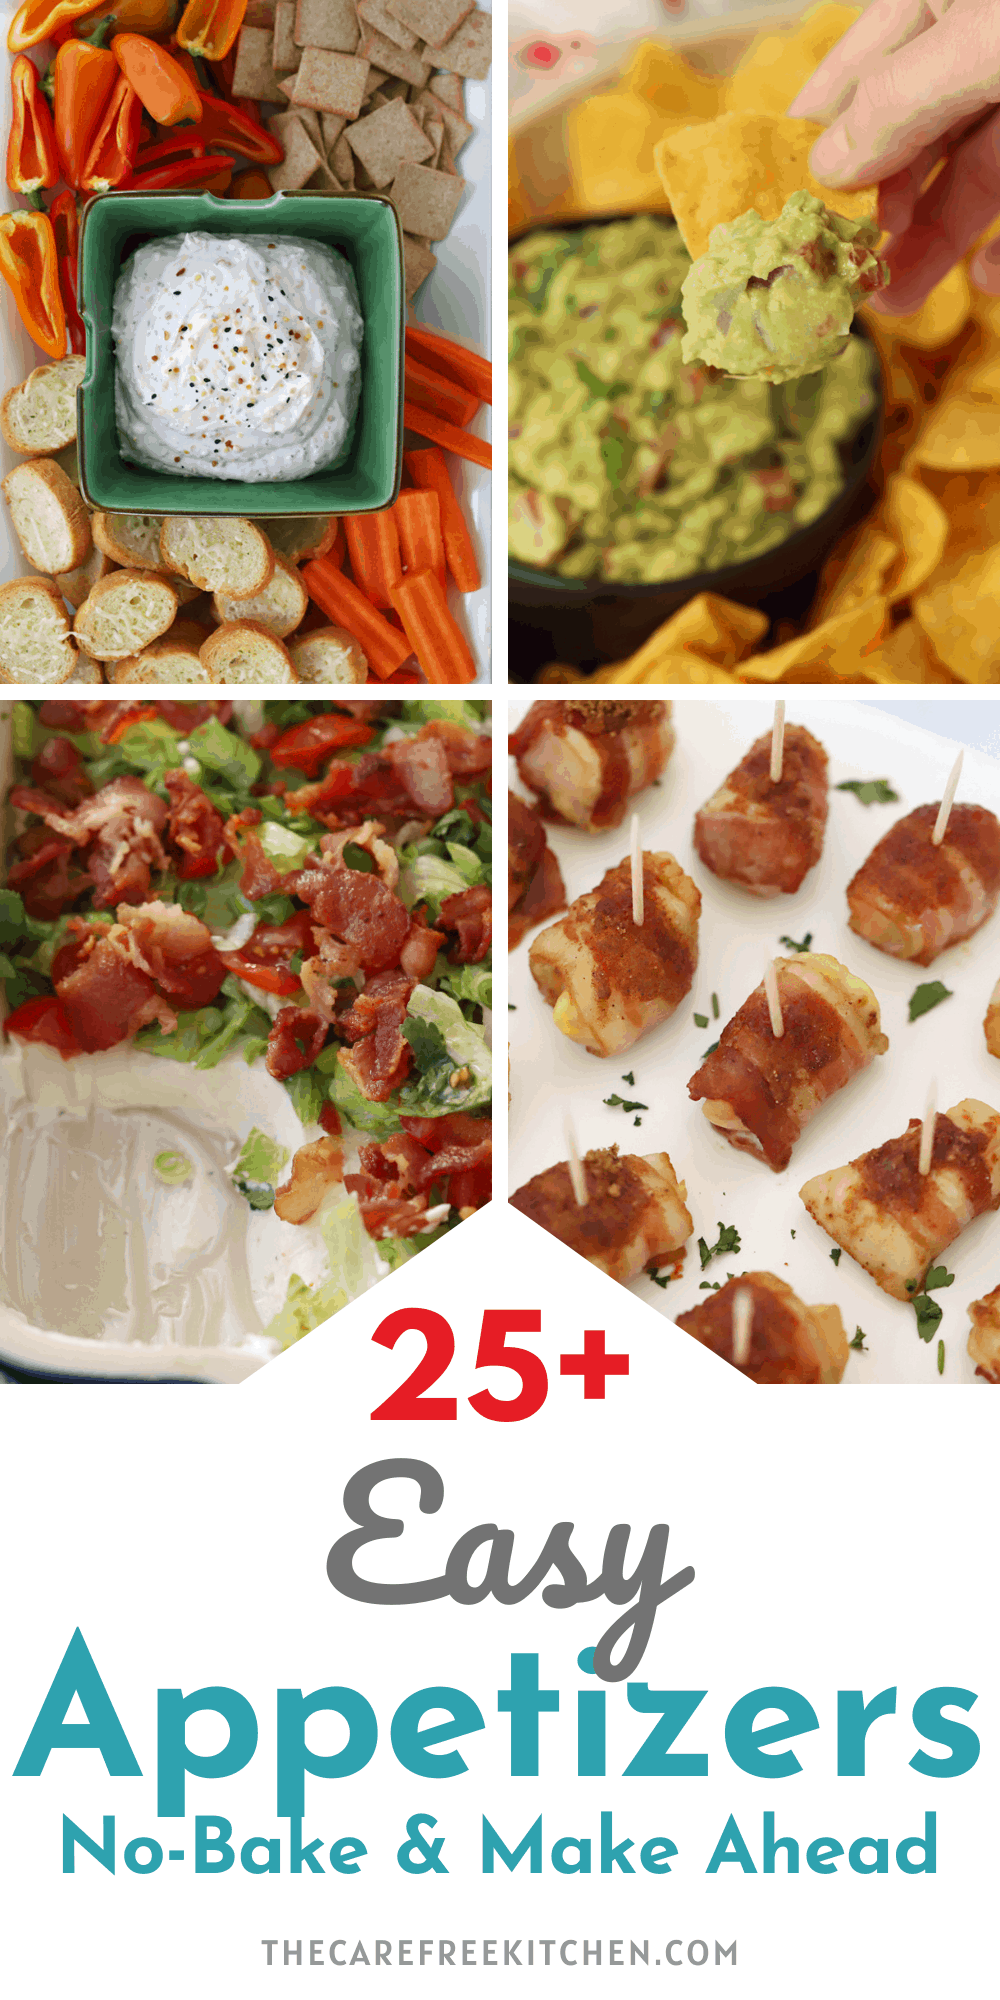 Best Easy Appetizers Recipes - The Carefree Kitchen